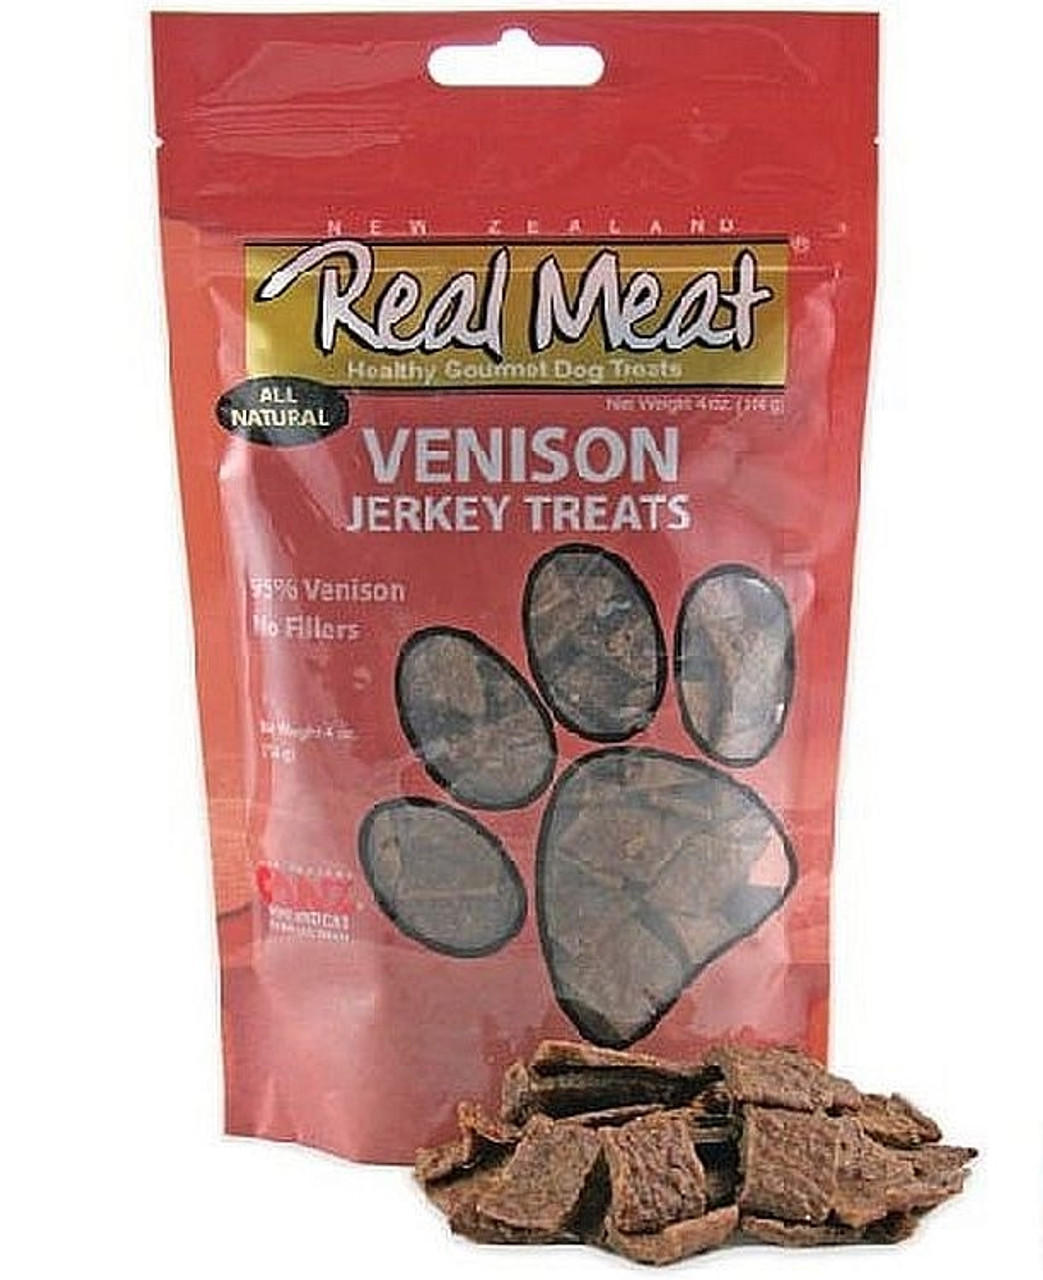 The Real Meat Company Dogs in Pets 